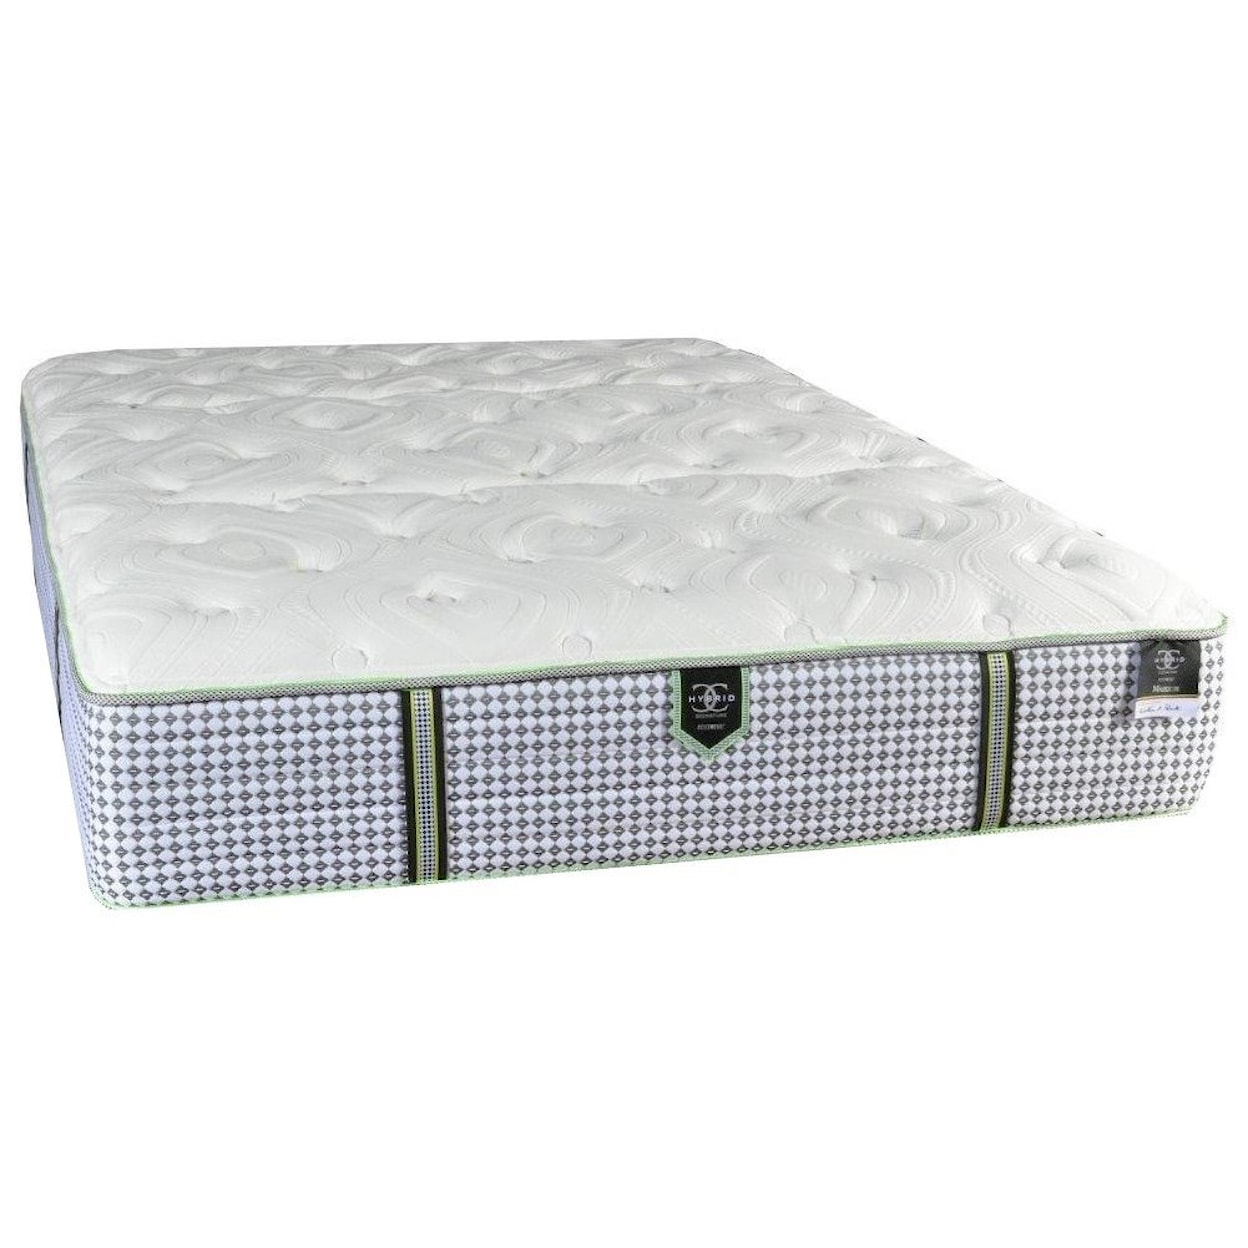 Restonic Marquis Plush Twin Pocketed Coil Mattress